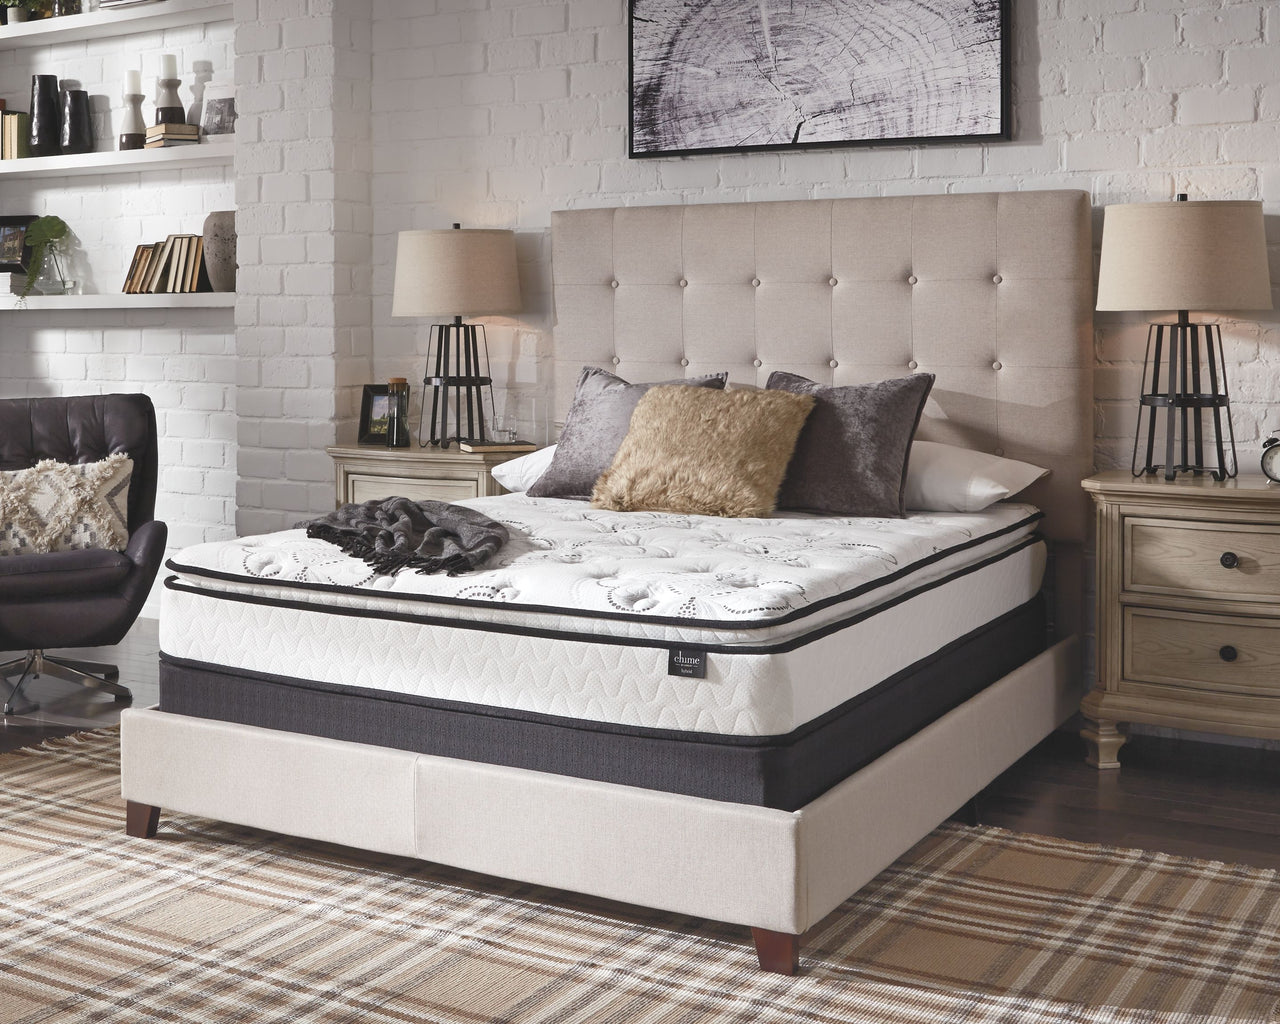 Bonnell - Pillow Top Mattress Tony's Home Furnishings Furniture. Beds. Dressers. Sofas.